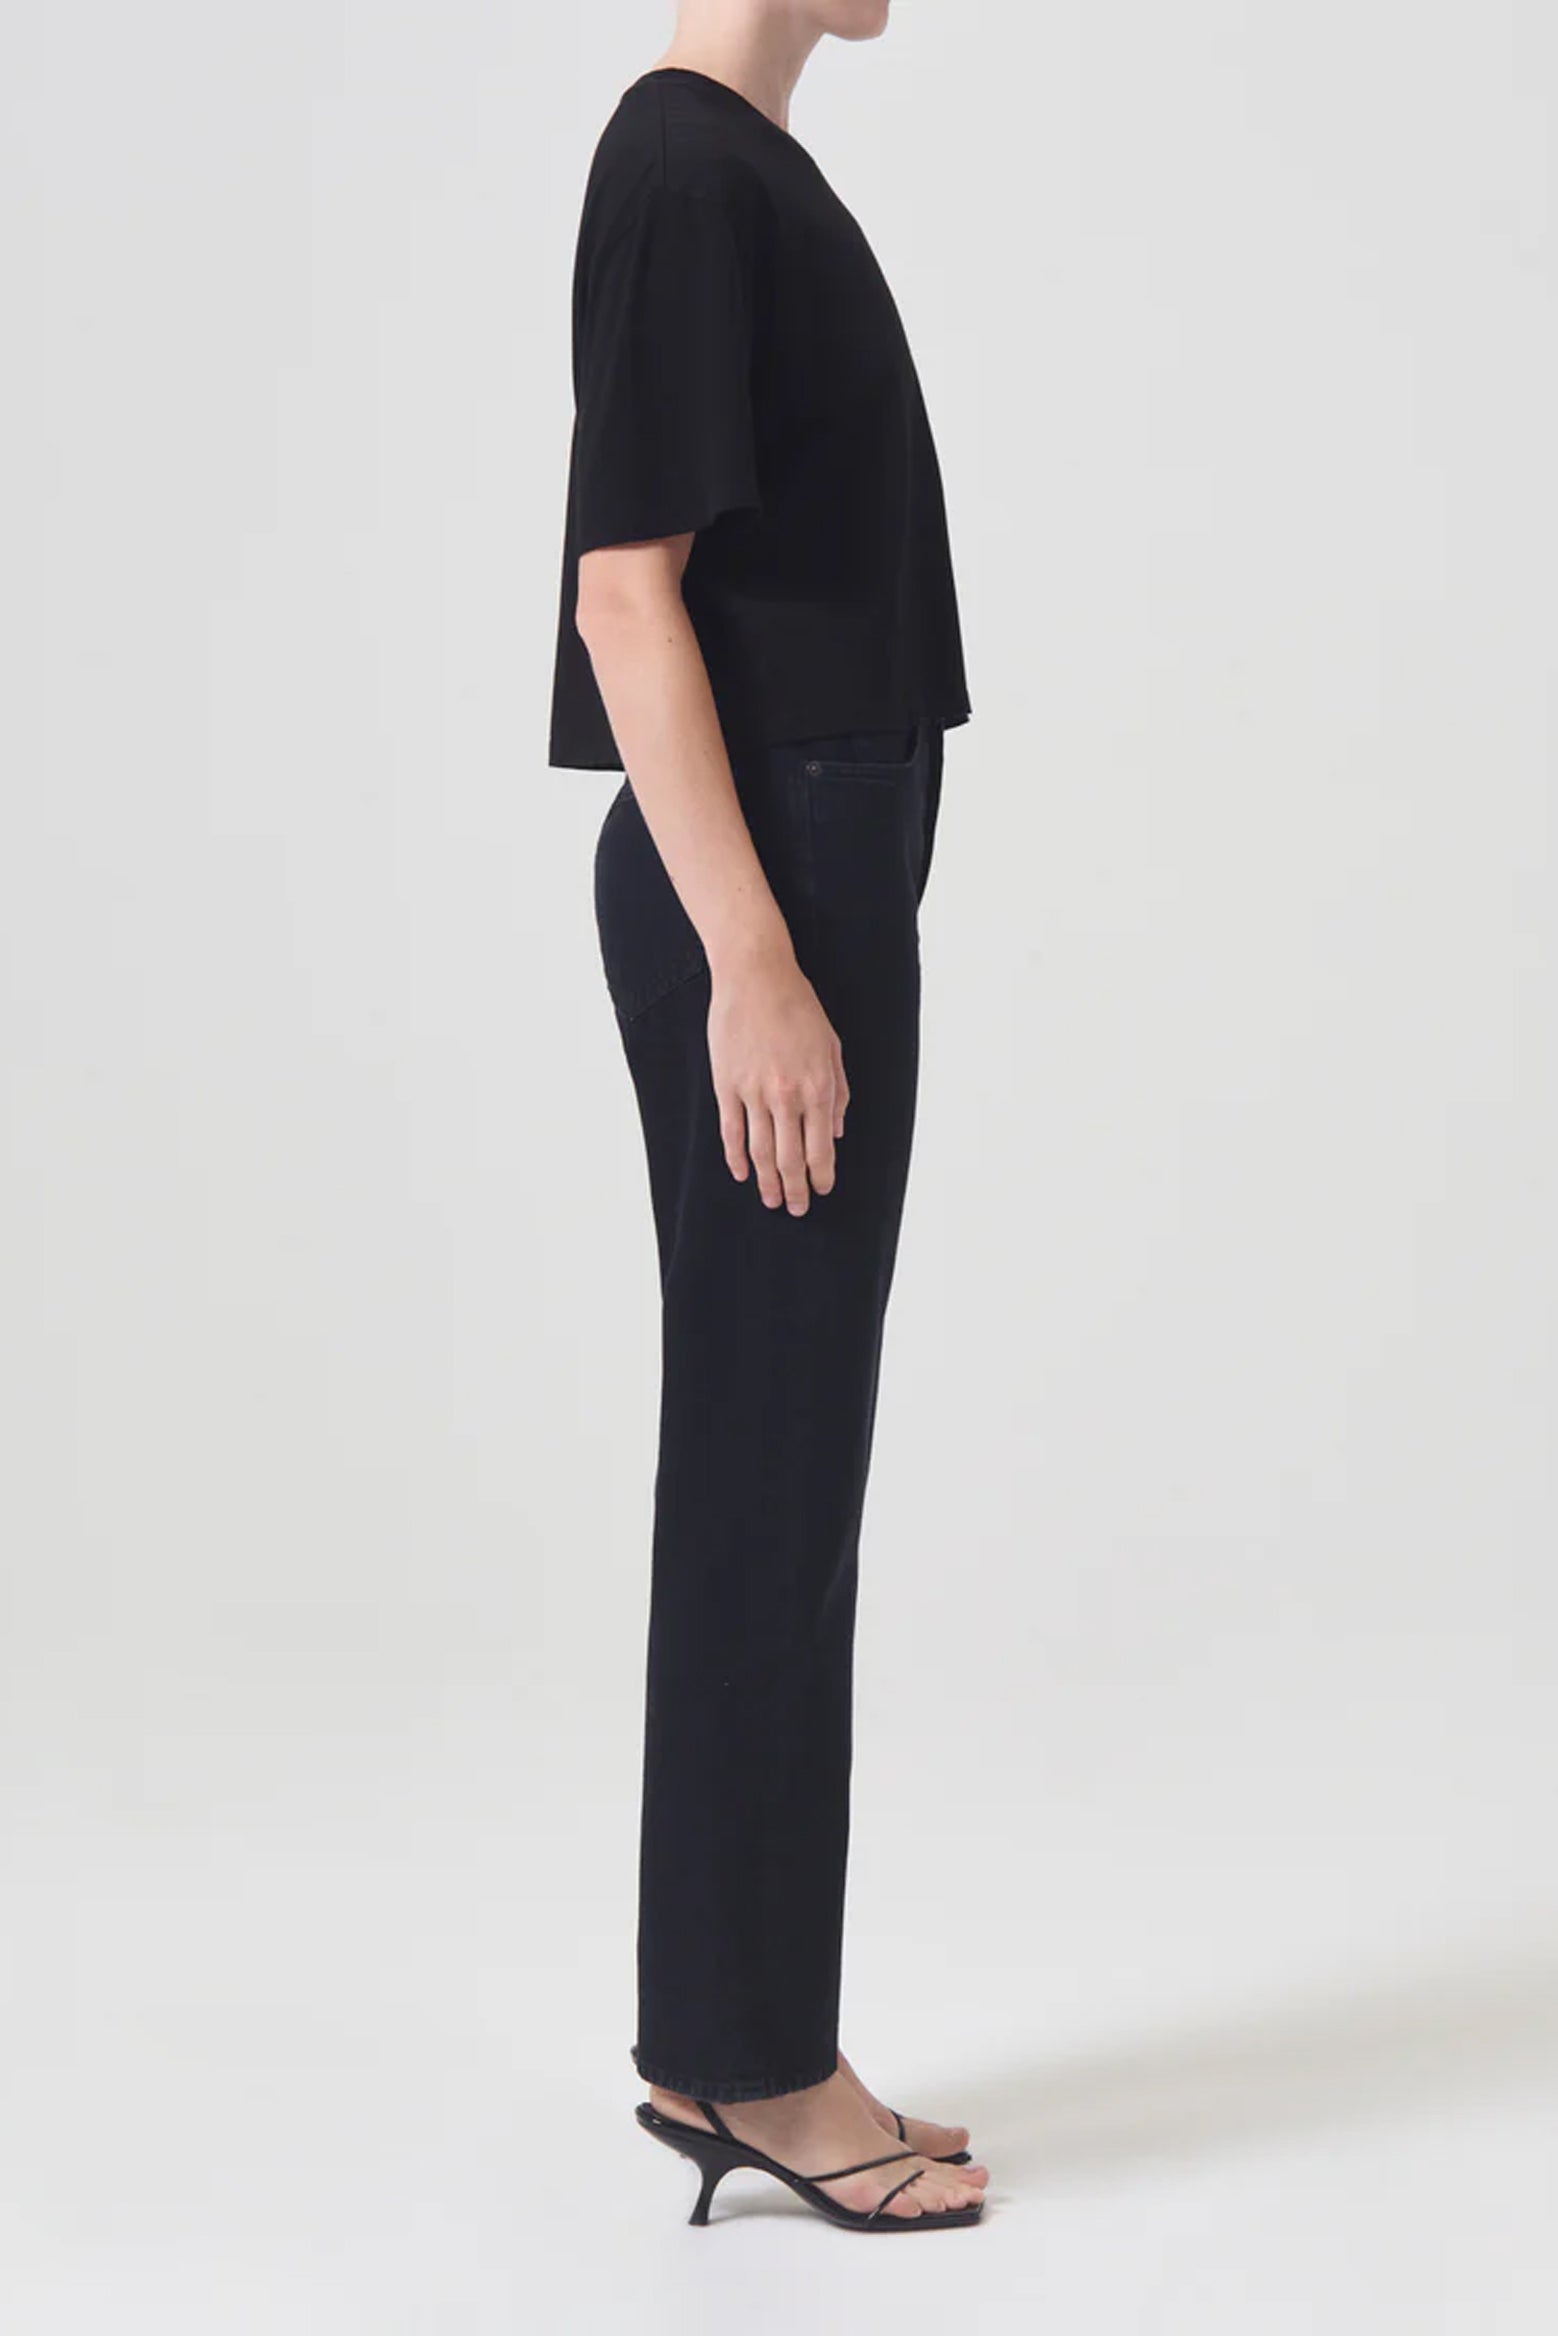 Agolde 90's Pinch Waist High Rise Straight Jean in Crushed available at The New Trend Australia.